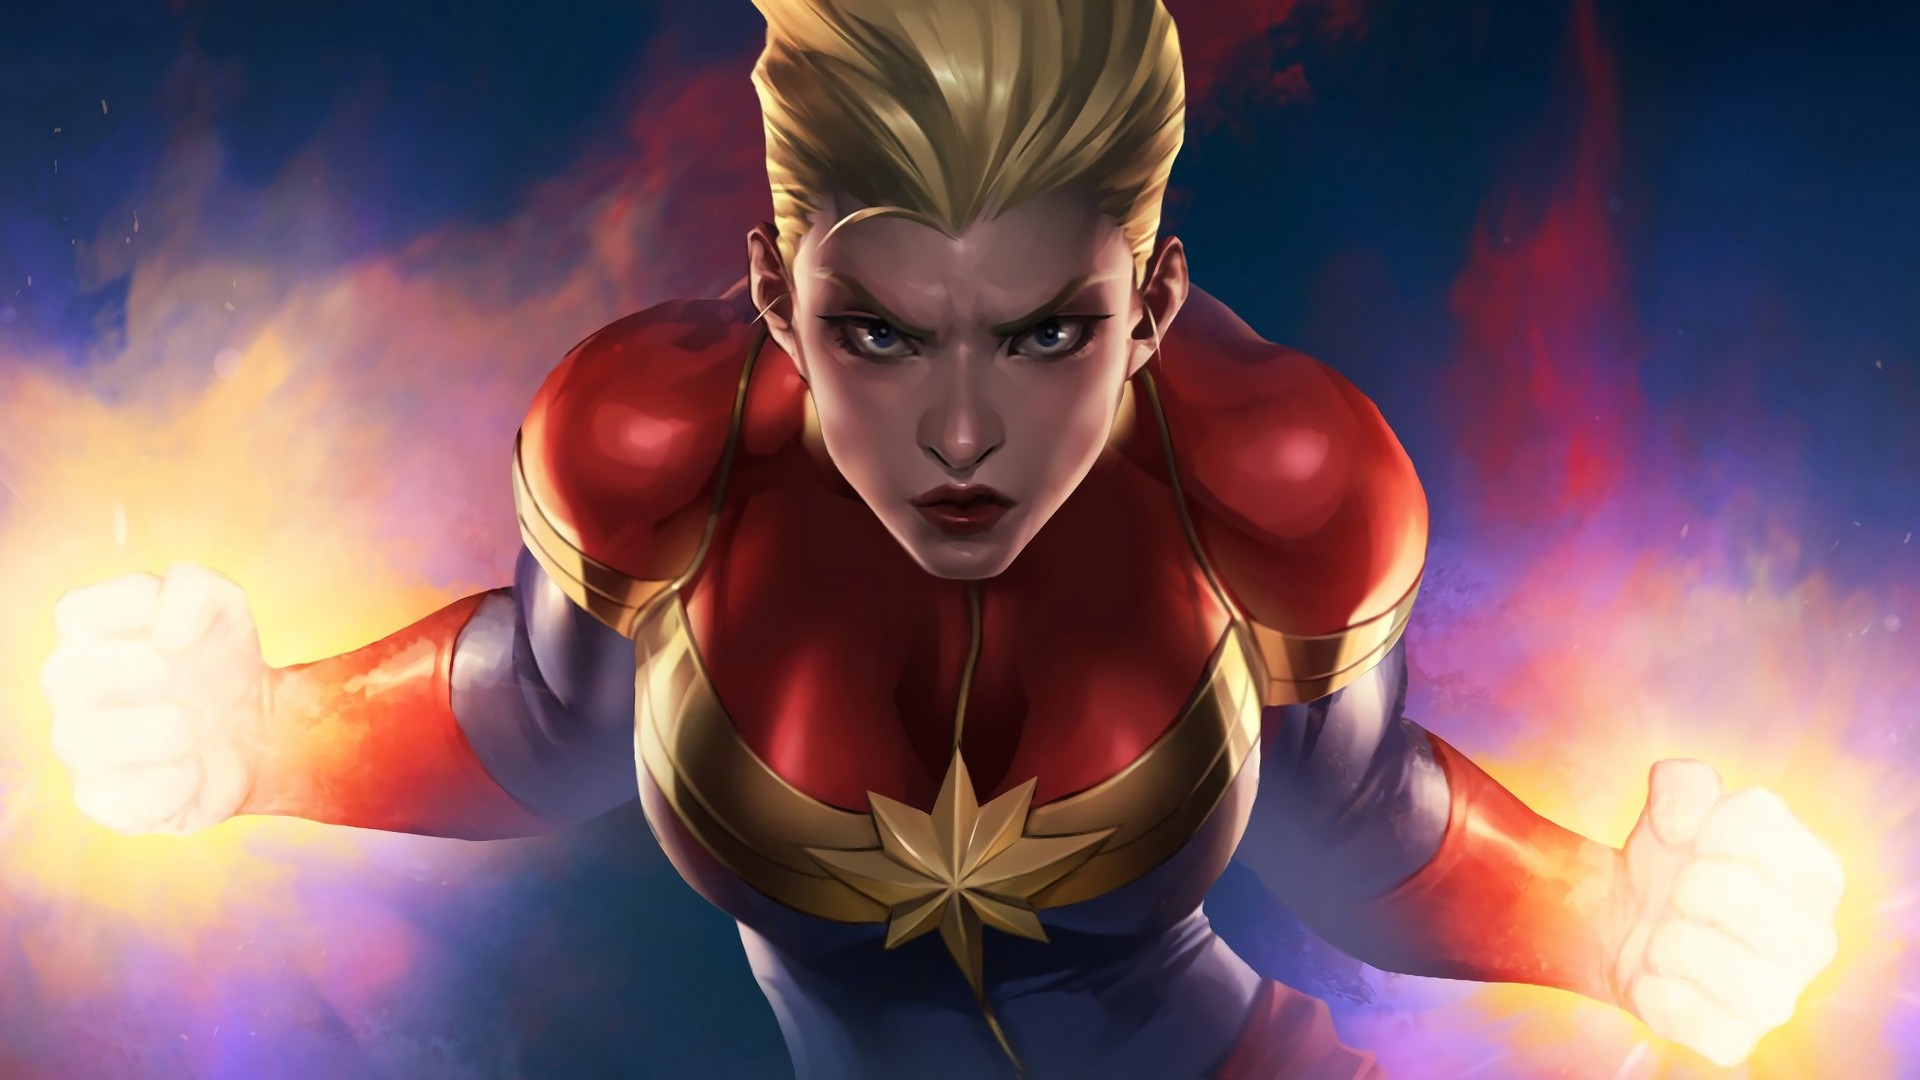 Best Captain Marvel Animated Wallpaper HD With high-resolution 1920X1080 pixel. You can use this wallpaper for your Desktop Computer Backgrounds, Mac Wallpapers, Android Lock screen or iPhone Screensavers and another smartphone device